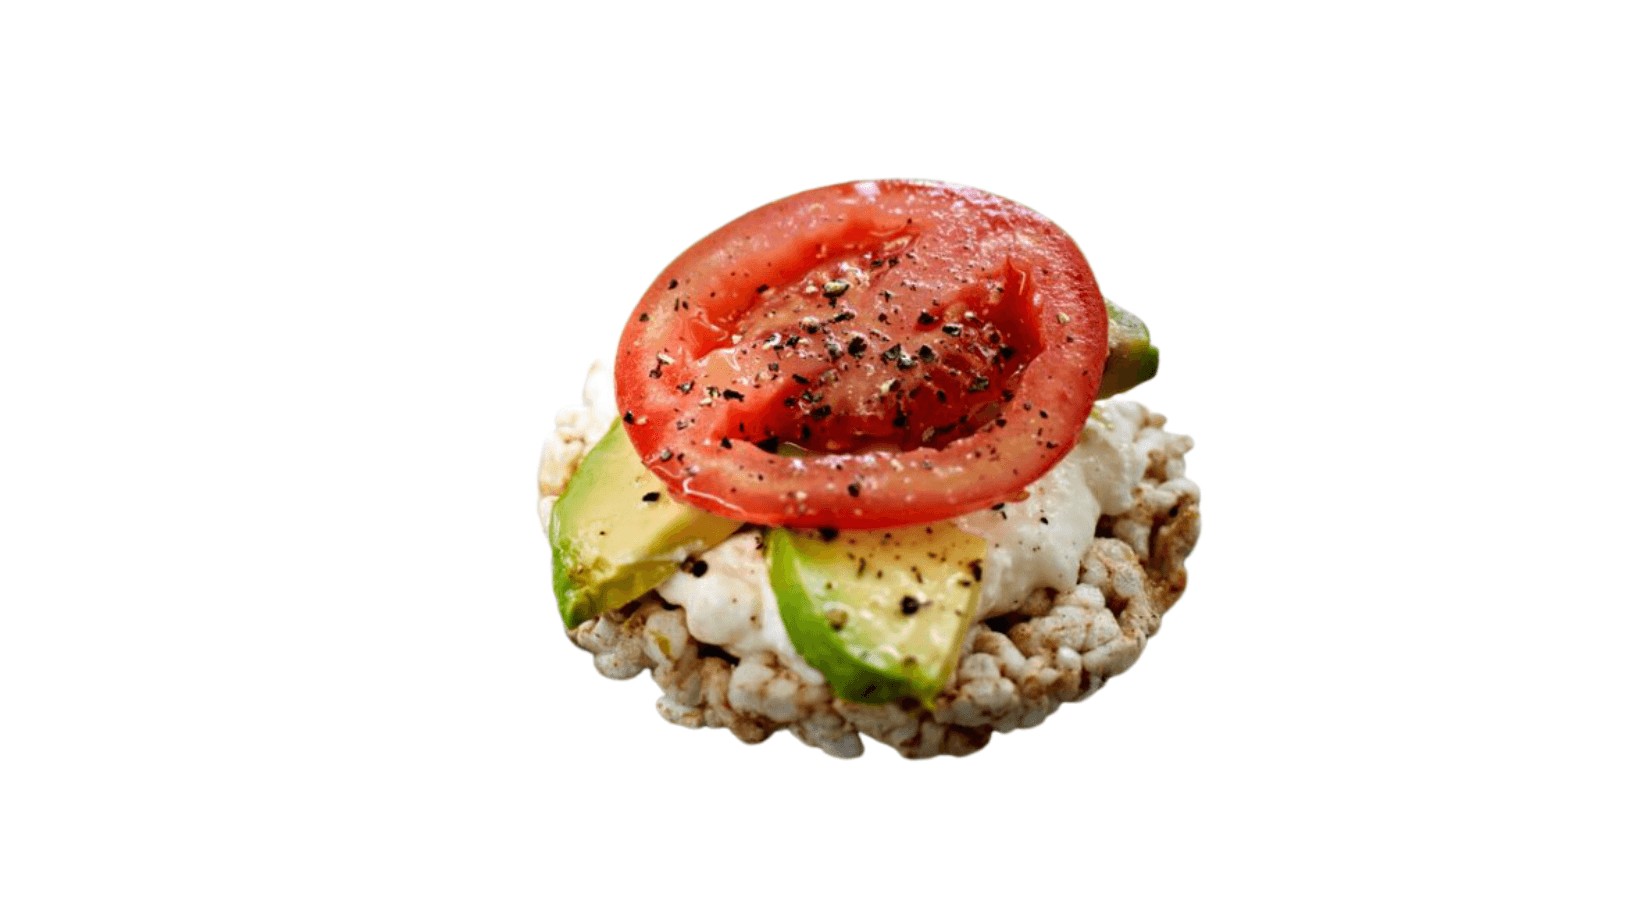 Rice cakes with avocado, tomato and cottage cheese